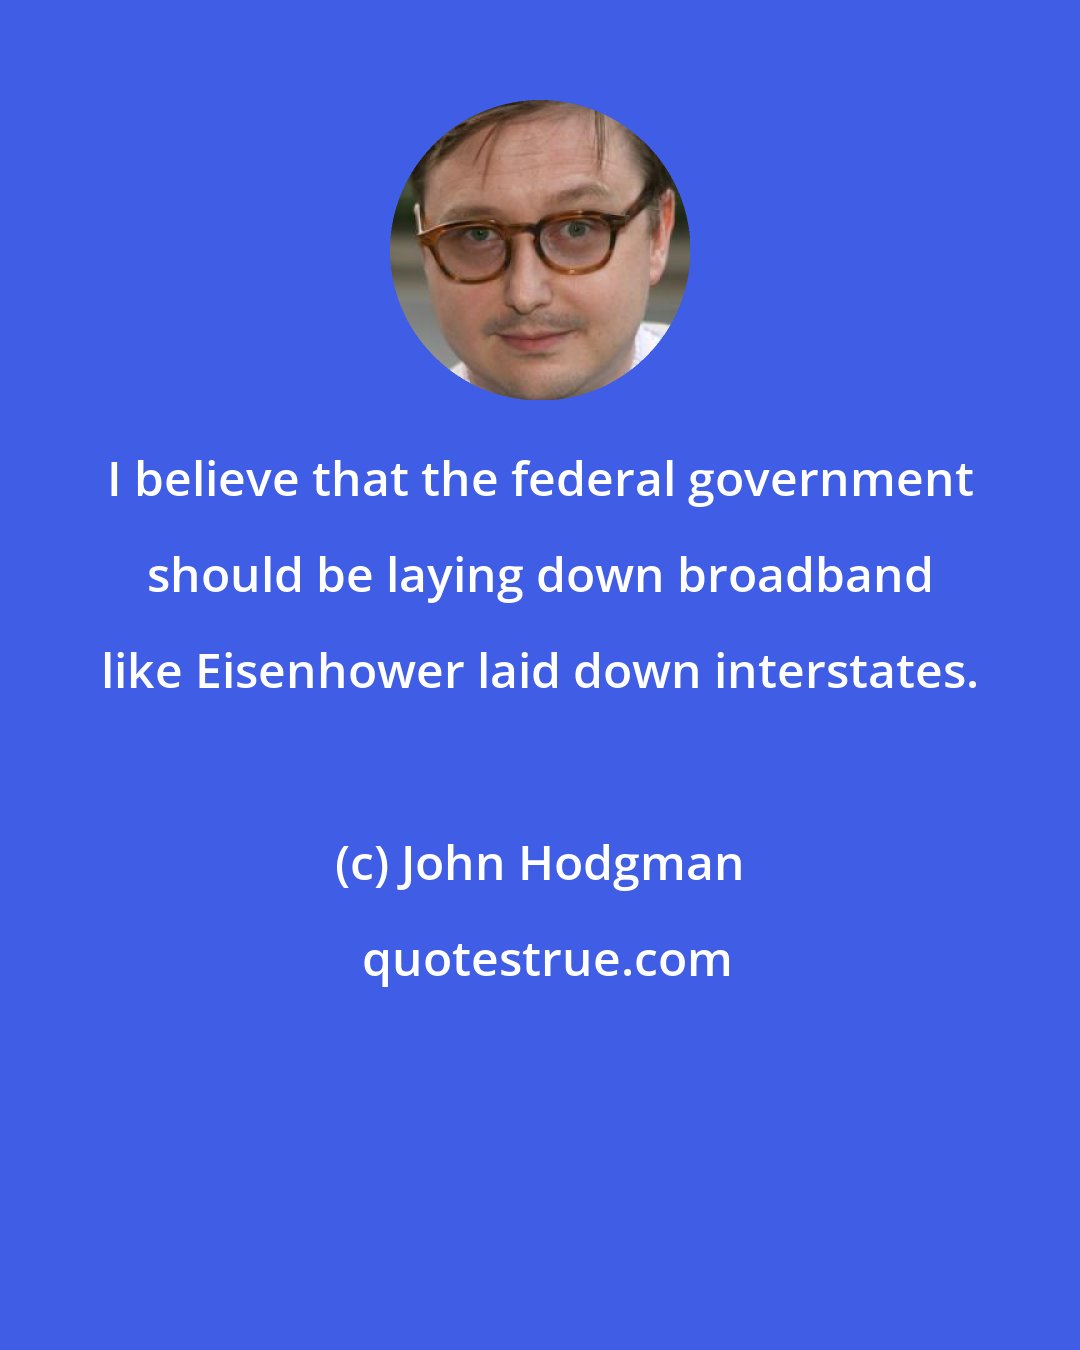 John Hodgman: I believe that the federal government should be laying down broadband like Eisenhower laid down interstates.